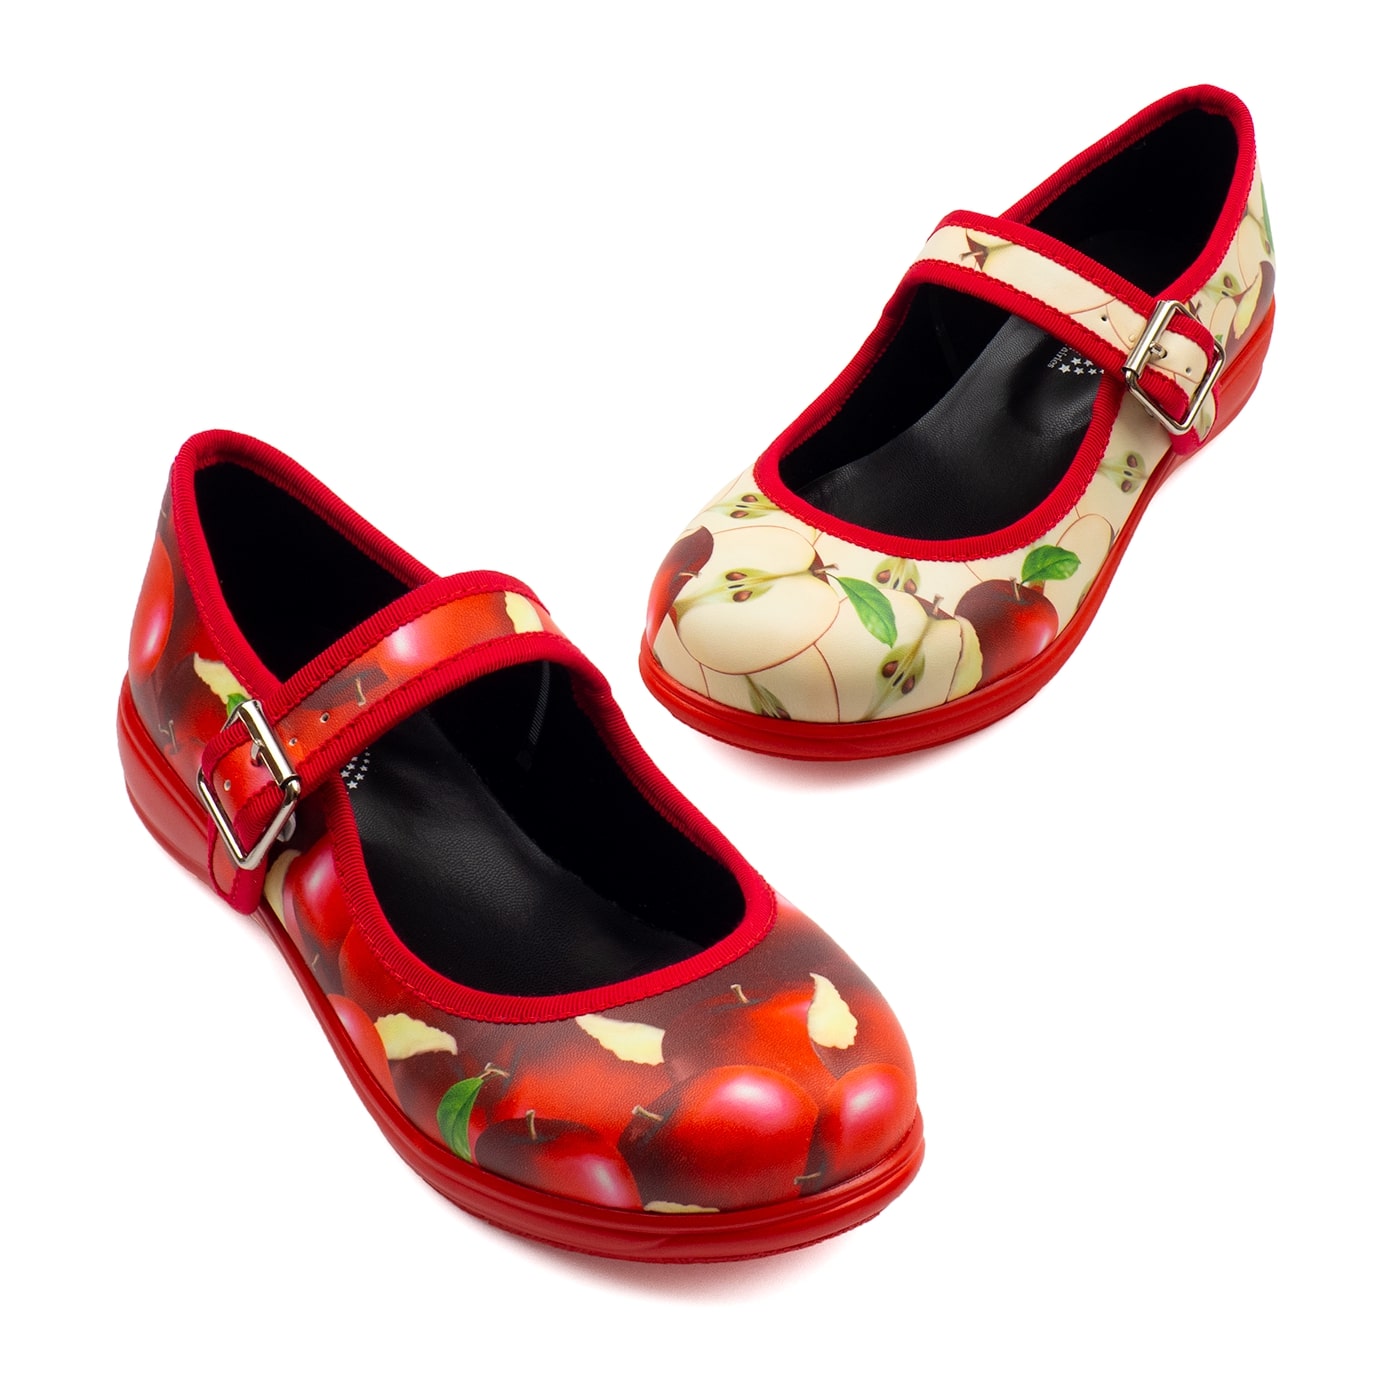 Orchard Mary Janes by RainbowsAndFairies.com (Red Apples - Apple Core - Snow White - Mismatched Shoes) - SKU: FW_MARYJ_ORCHD_ORG - Pic 01